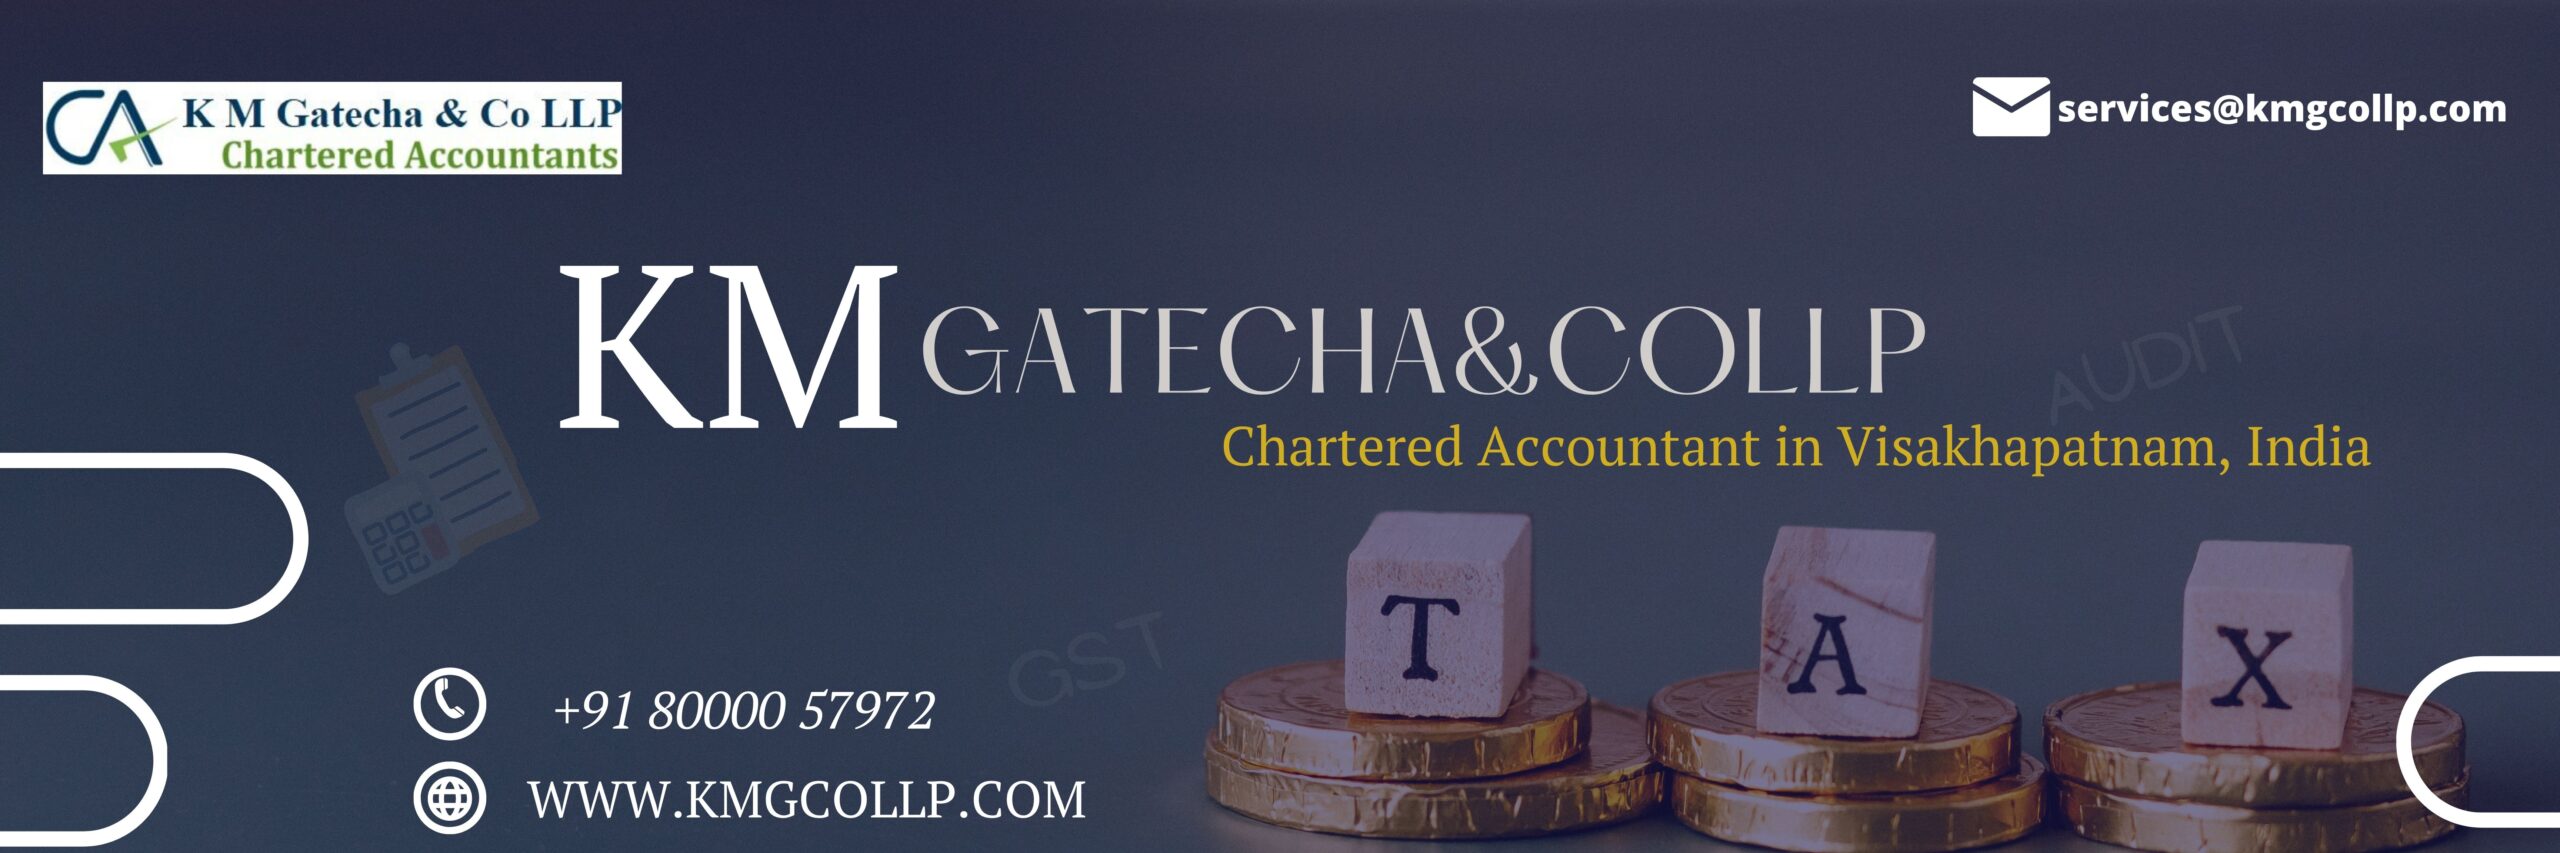 ca chartered accountant in visakhapatnam, india